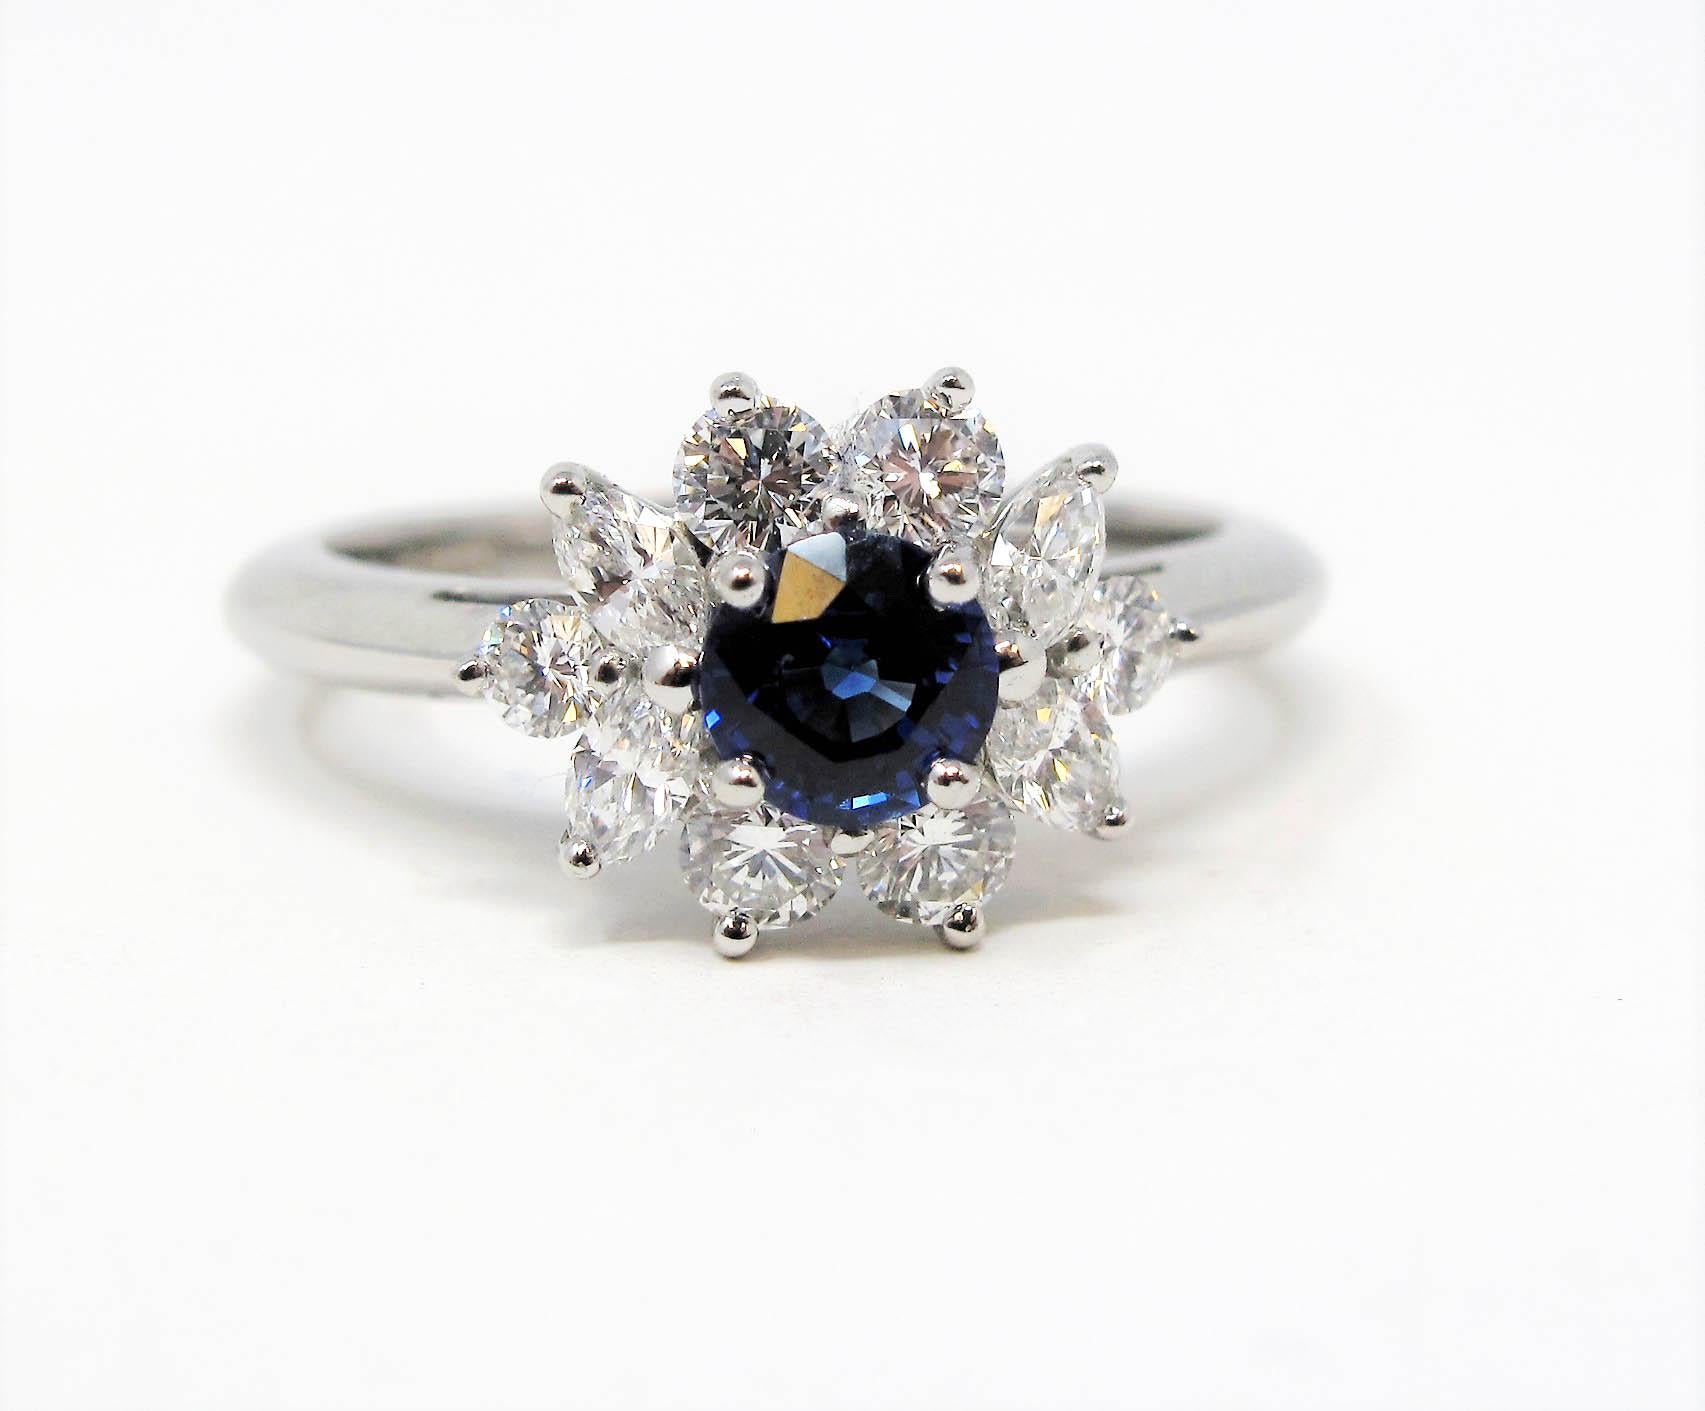 Absolutely radiant natural sapphire and diamond halo ring from esteemed jeweler, Tiffany & Co.. The vivid blue center stone is paired with a glittering halo of bright white diamonds, allowing this beautiful, feminine piece to sparkle spectacularly